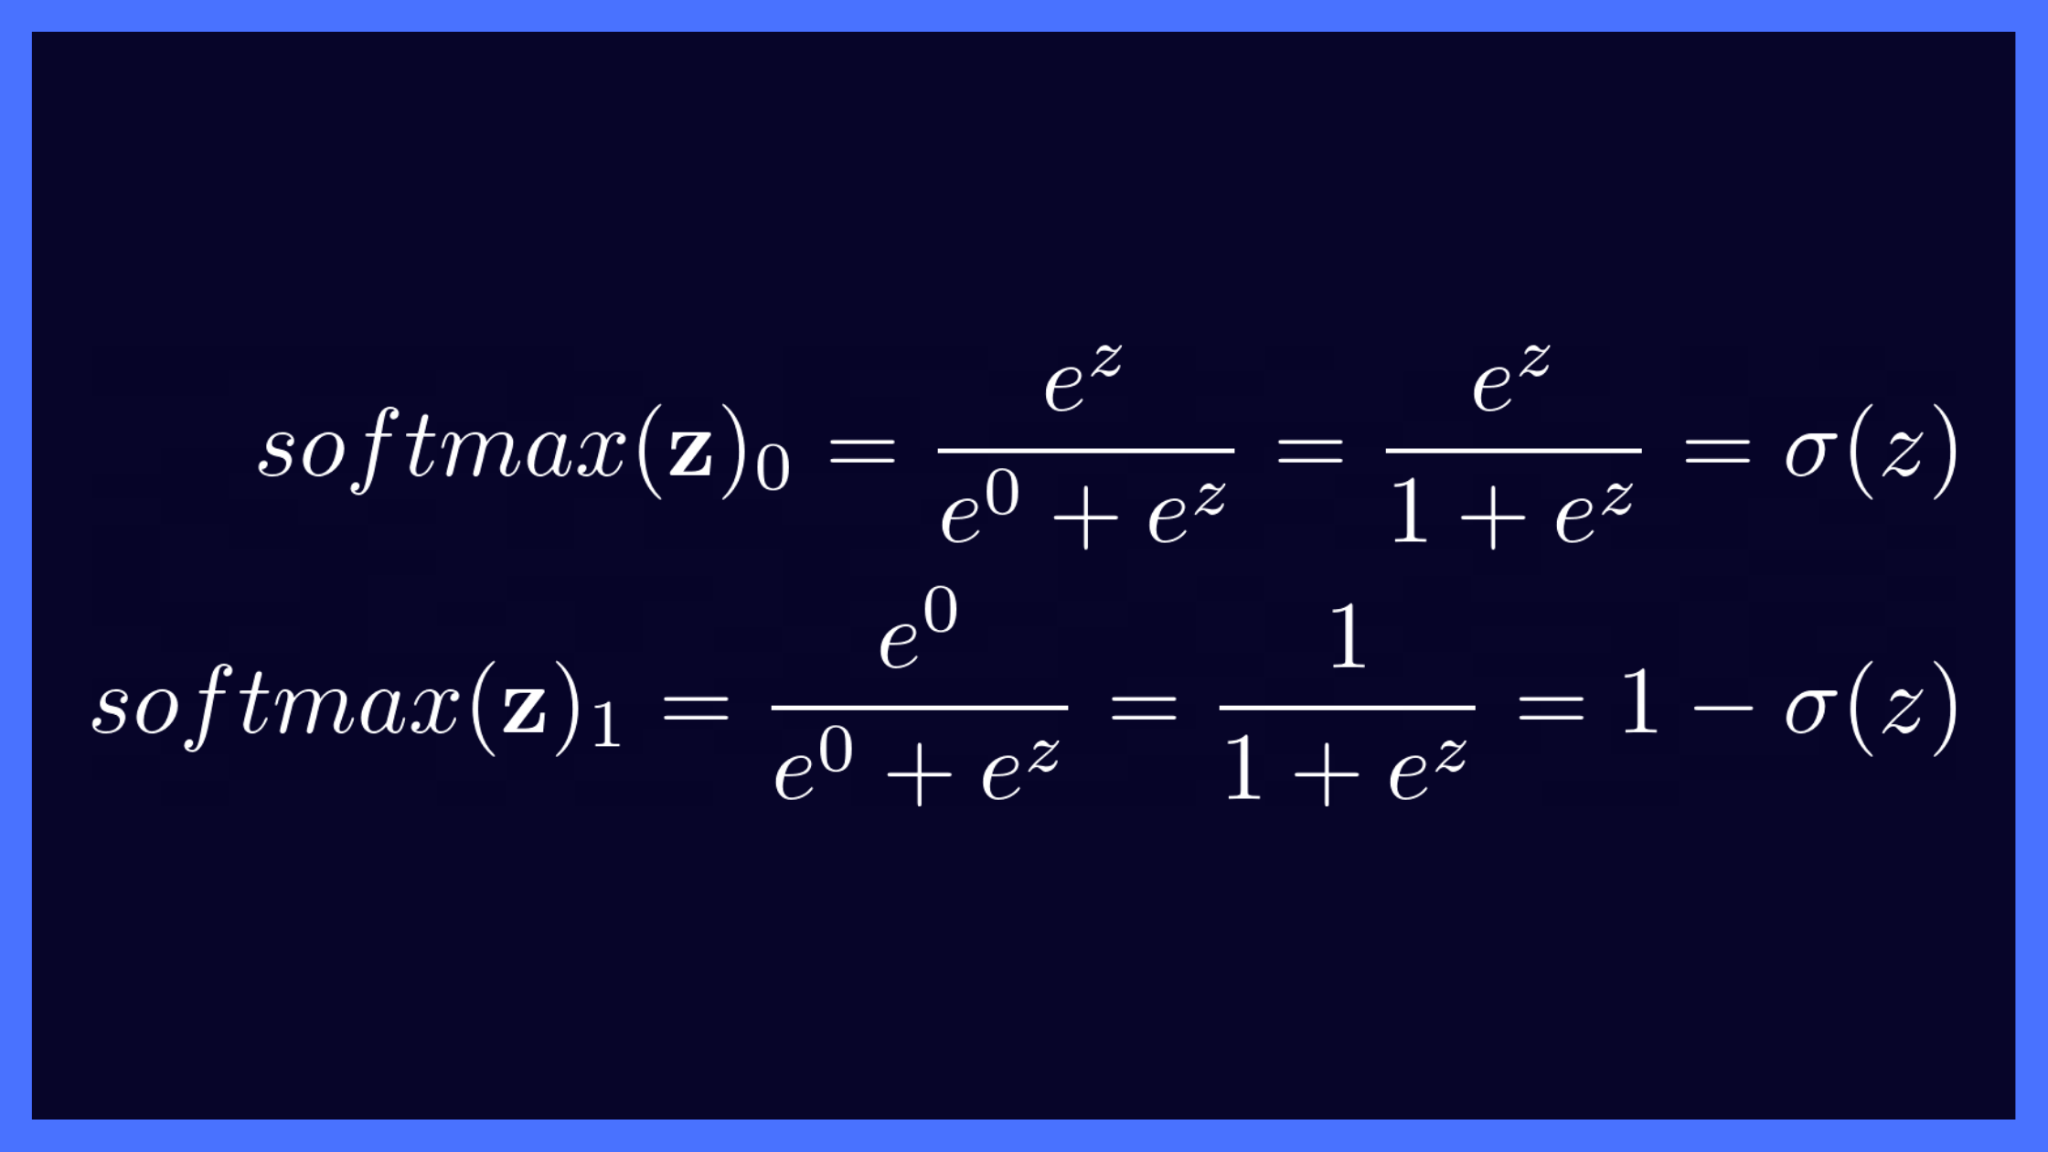 Equivalence of Sigmoid & Softmax Activations